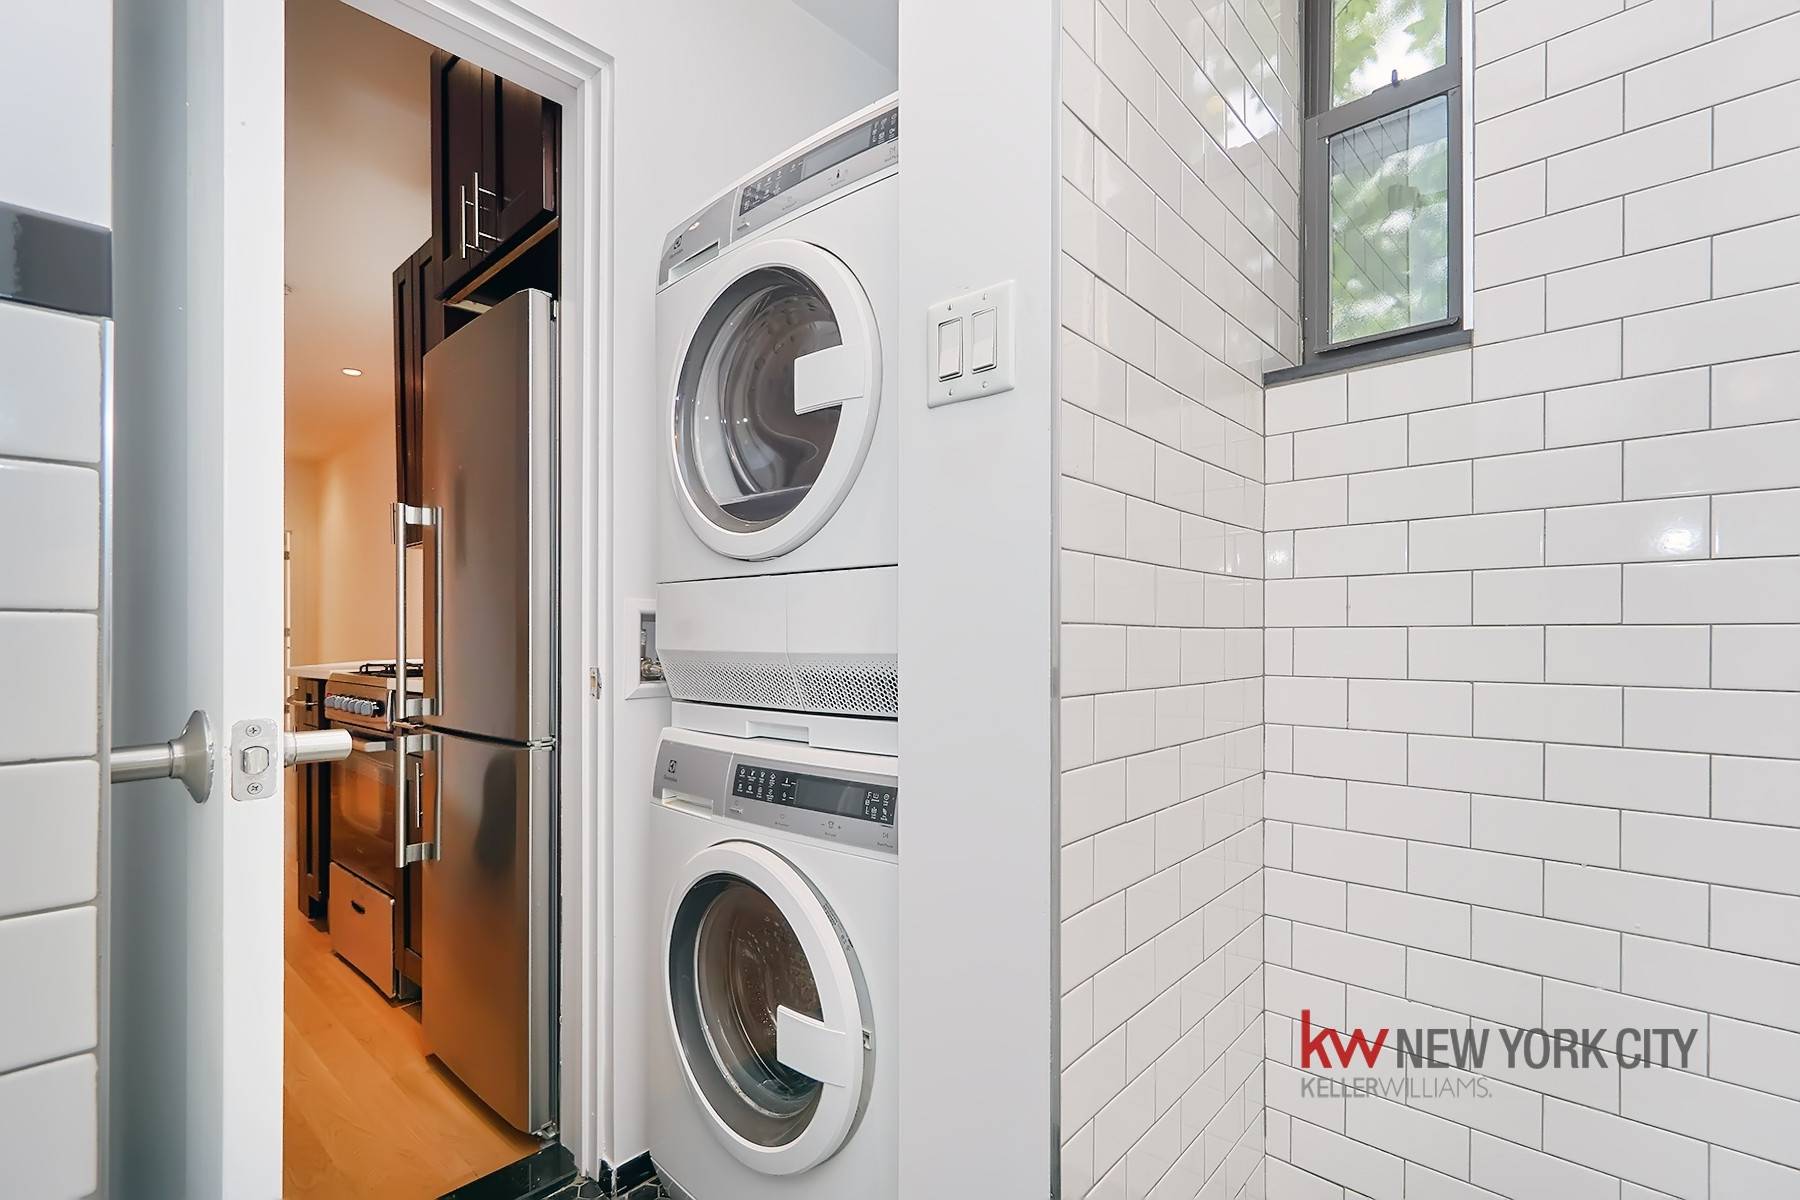 This is the LOWEST PRICED 1 bedroom option available for rent in the ENTIRE Boerum Hill area.